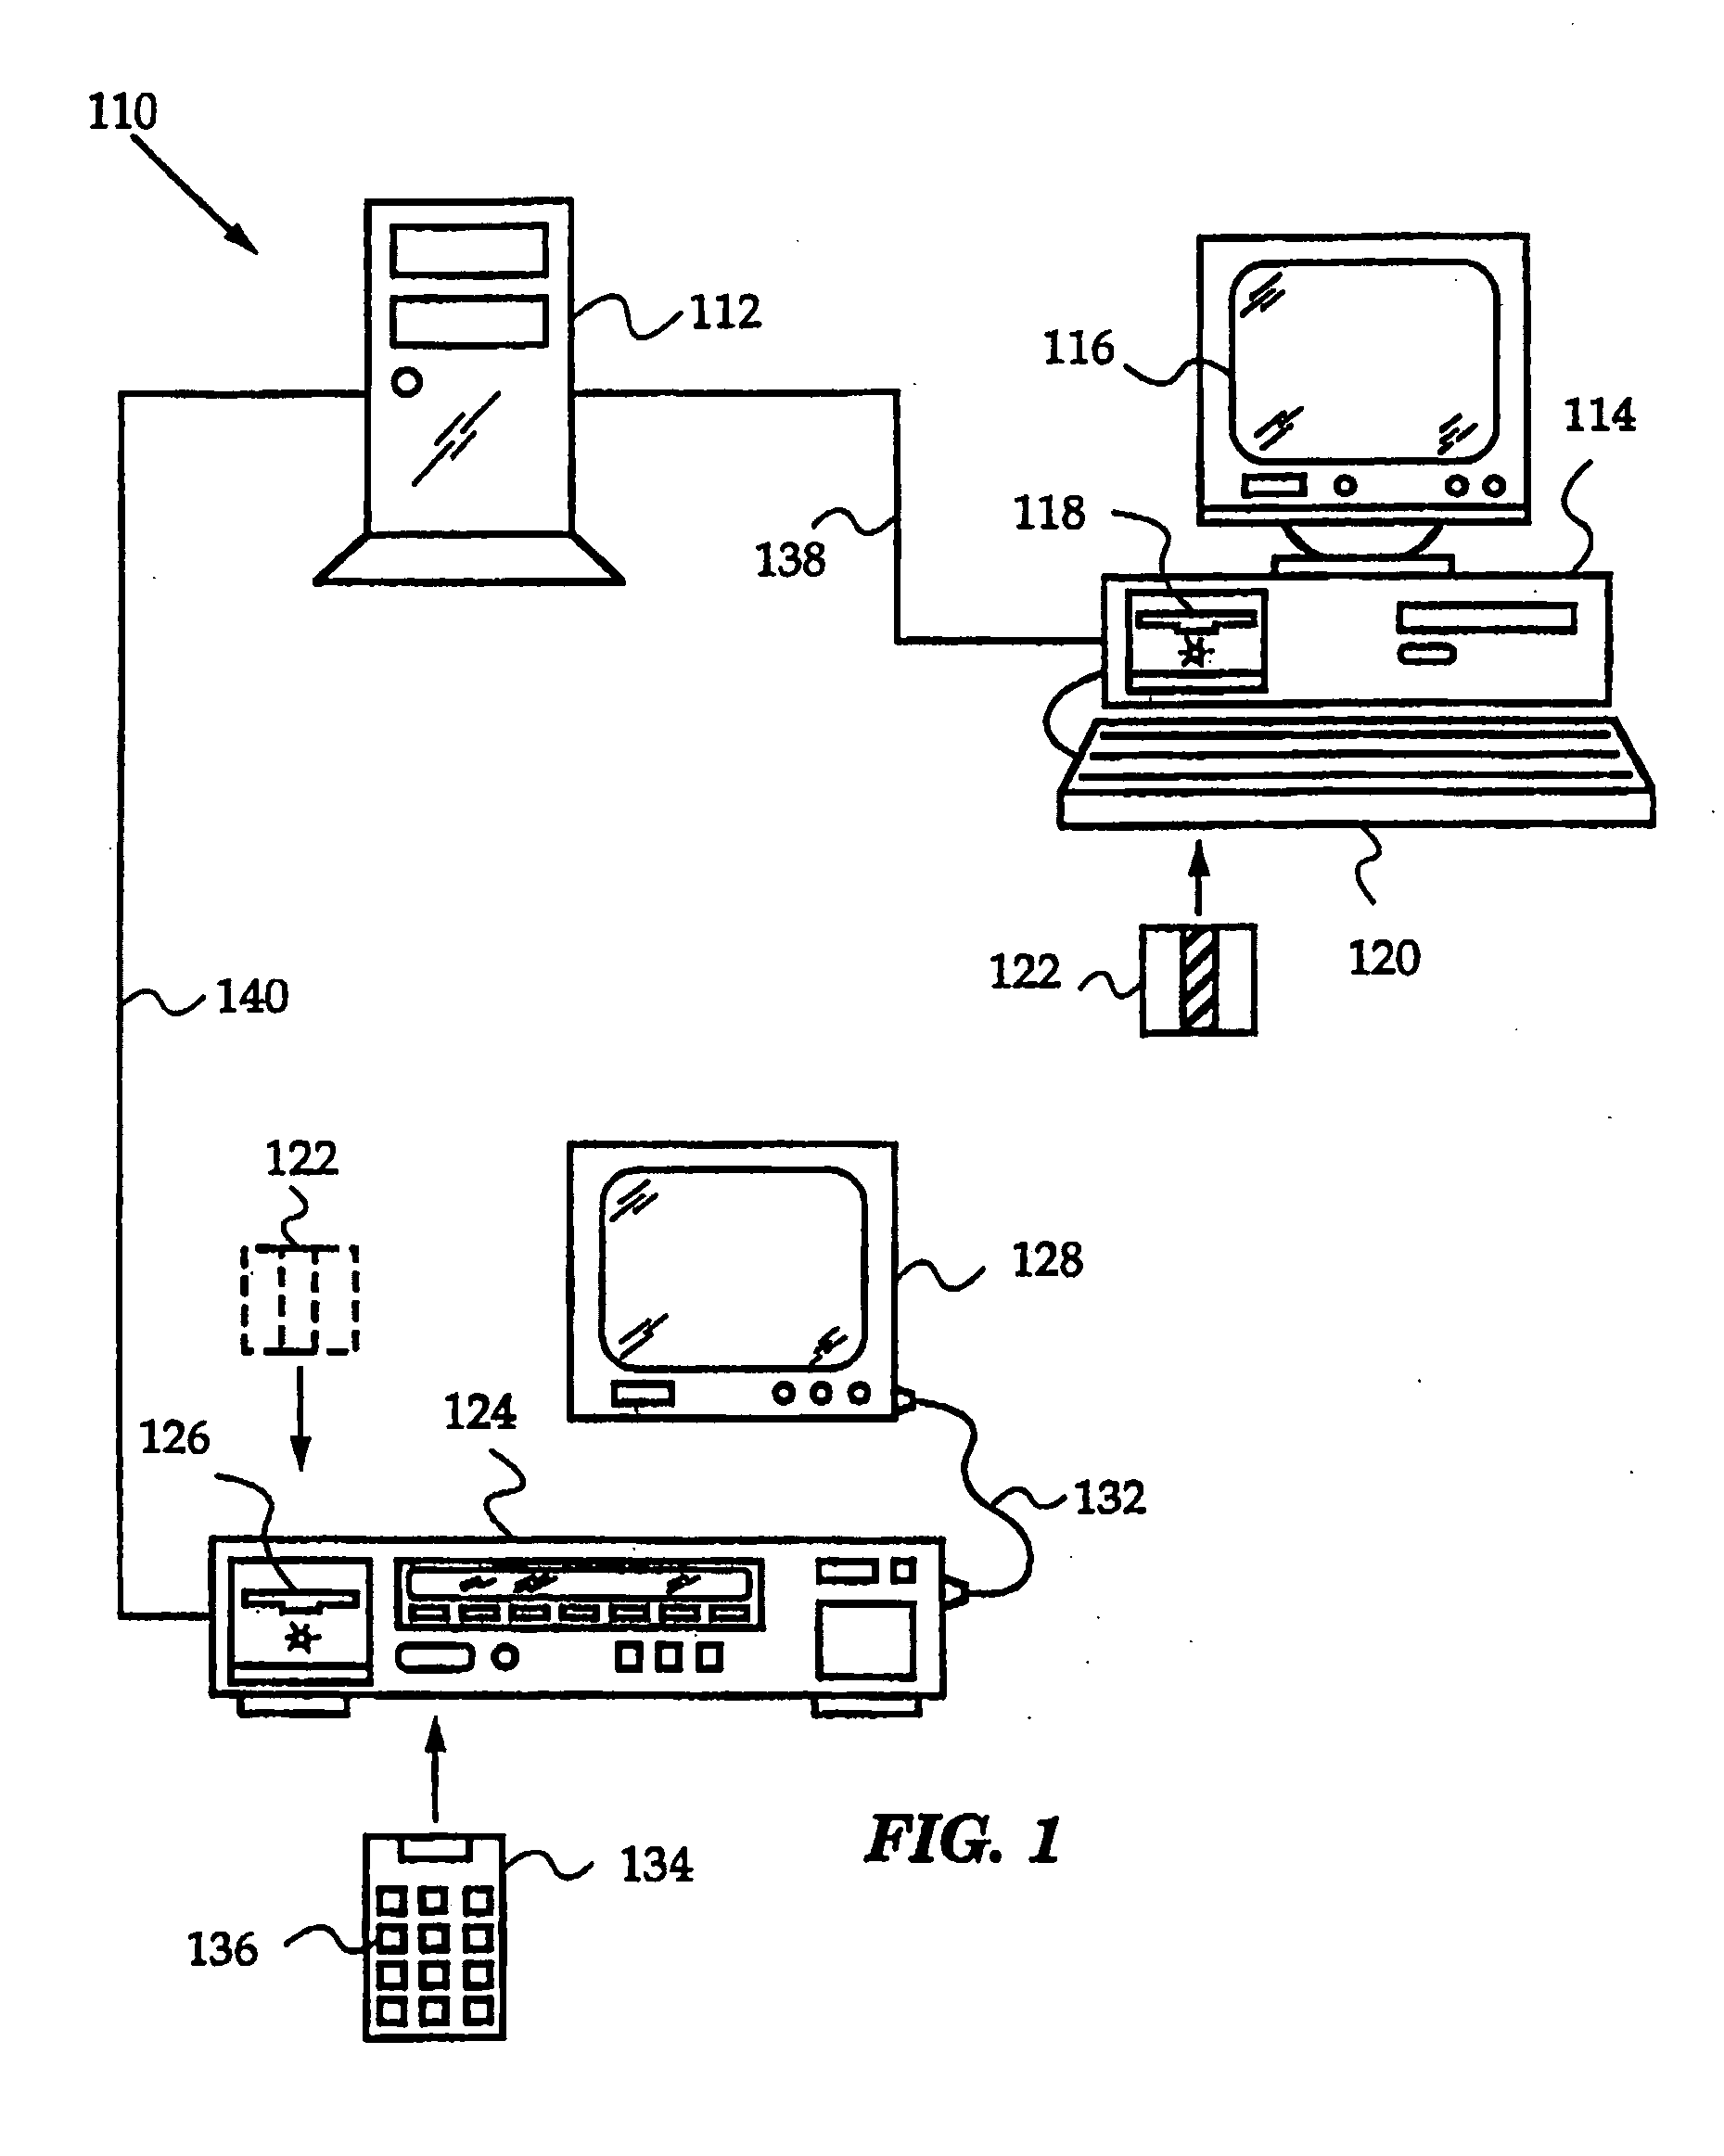 System and method for monitoring a physiological condition